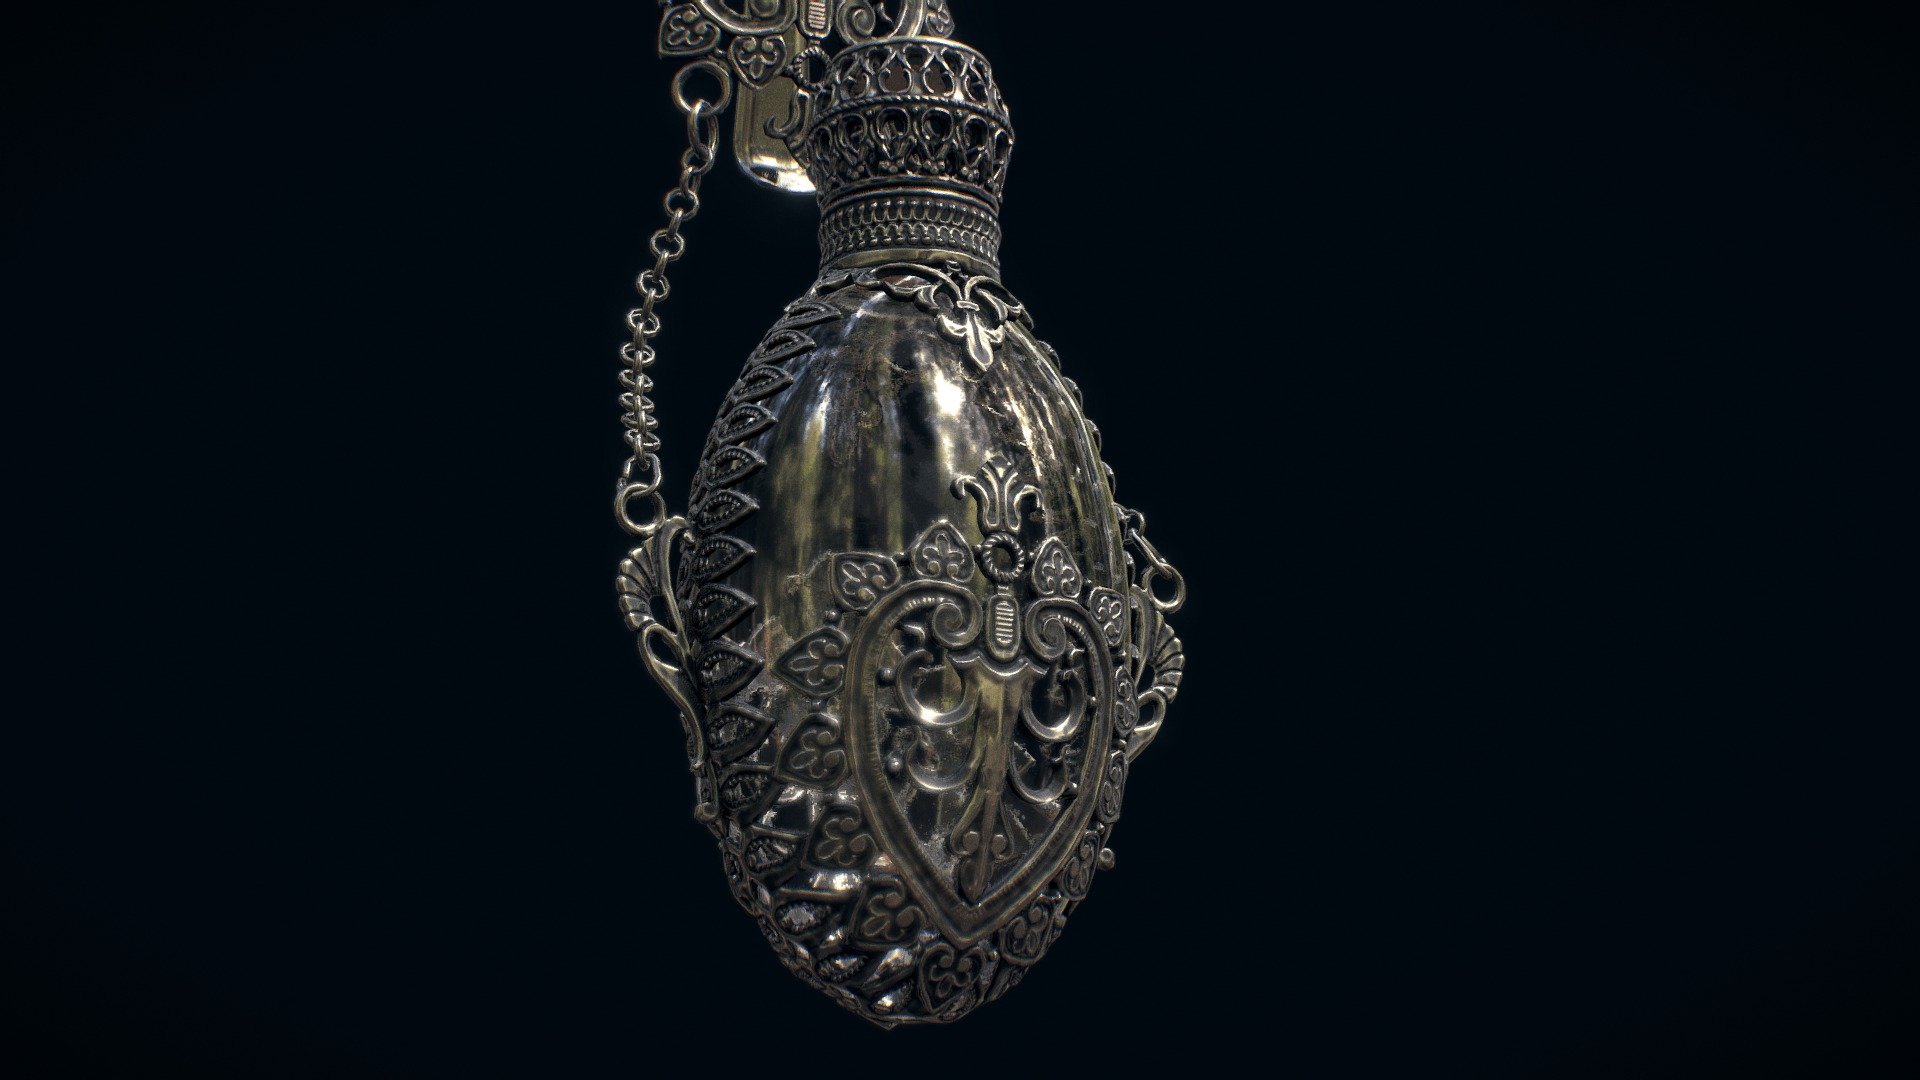 ancient perfume vile, professionally modeled from real life reference. the model has a PBR material with 8K textures. the material includes following texture maps: diffuse, metallic, roughness, transmission, normal 3d model